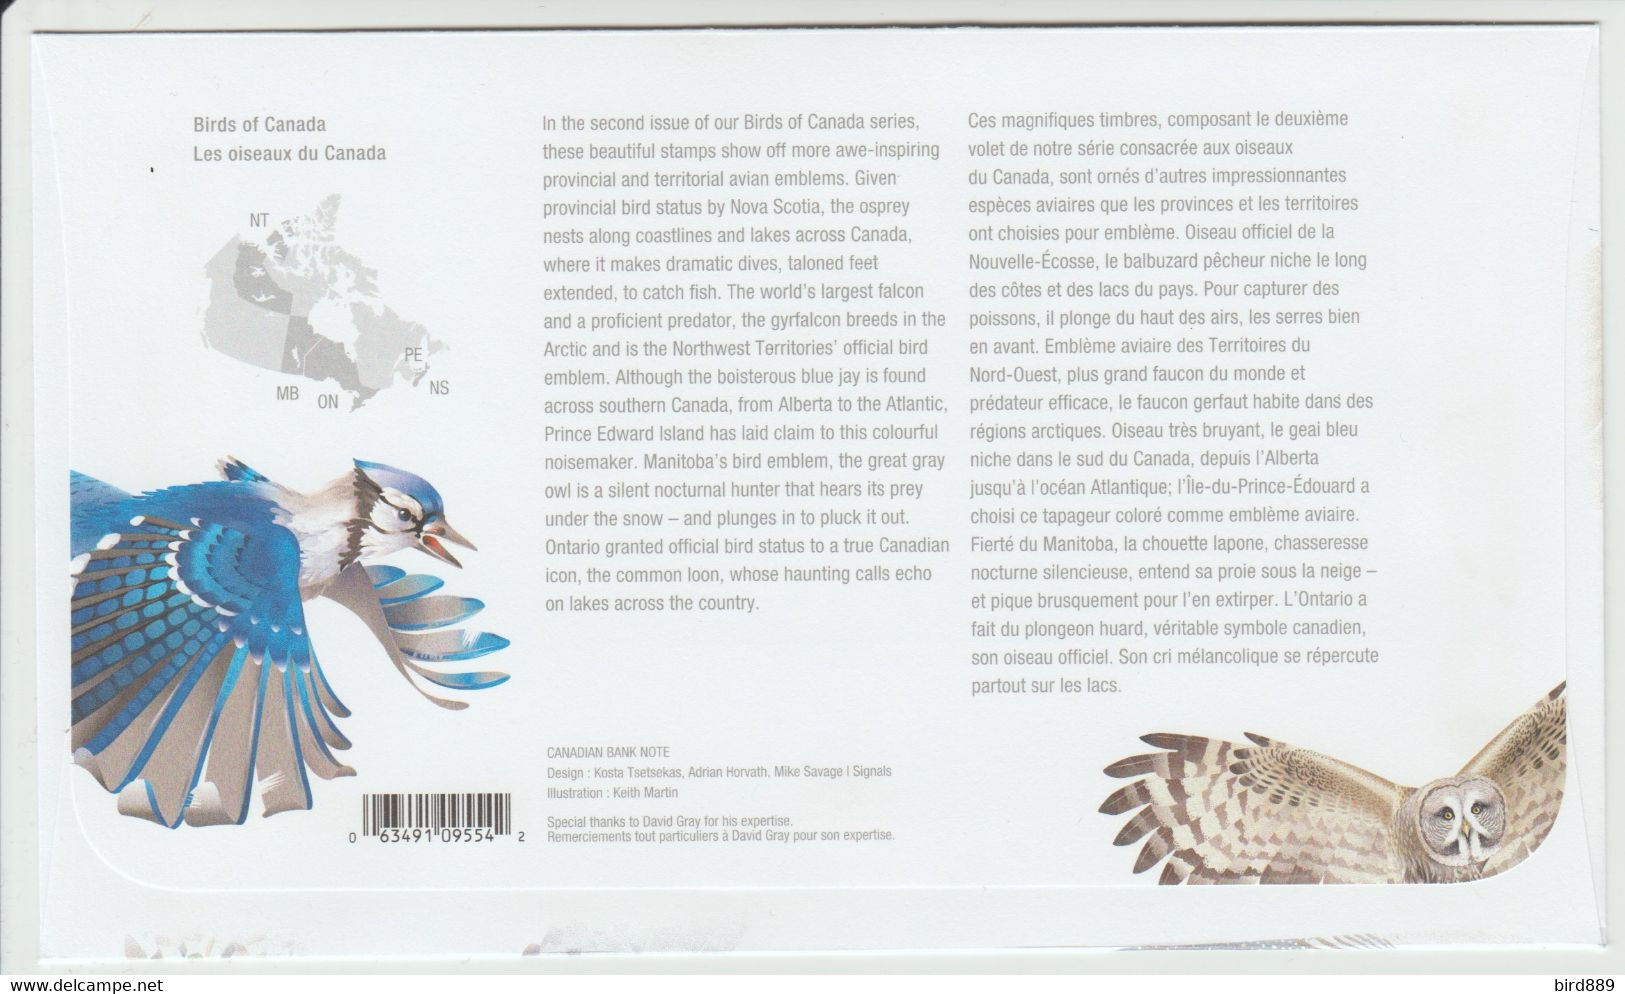 2017 Canada Birds Miniature Sheet  FDC Check Both Images - 2011-...